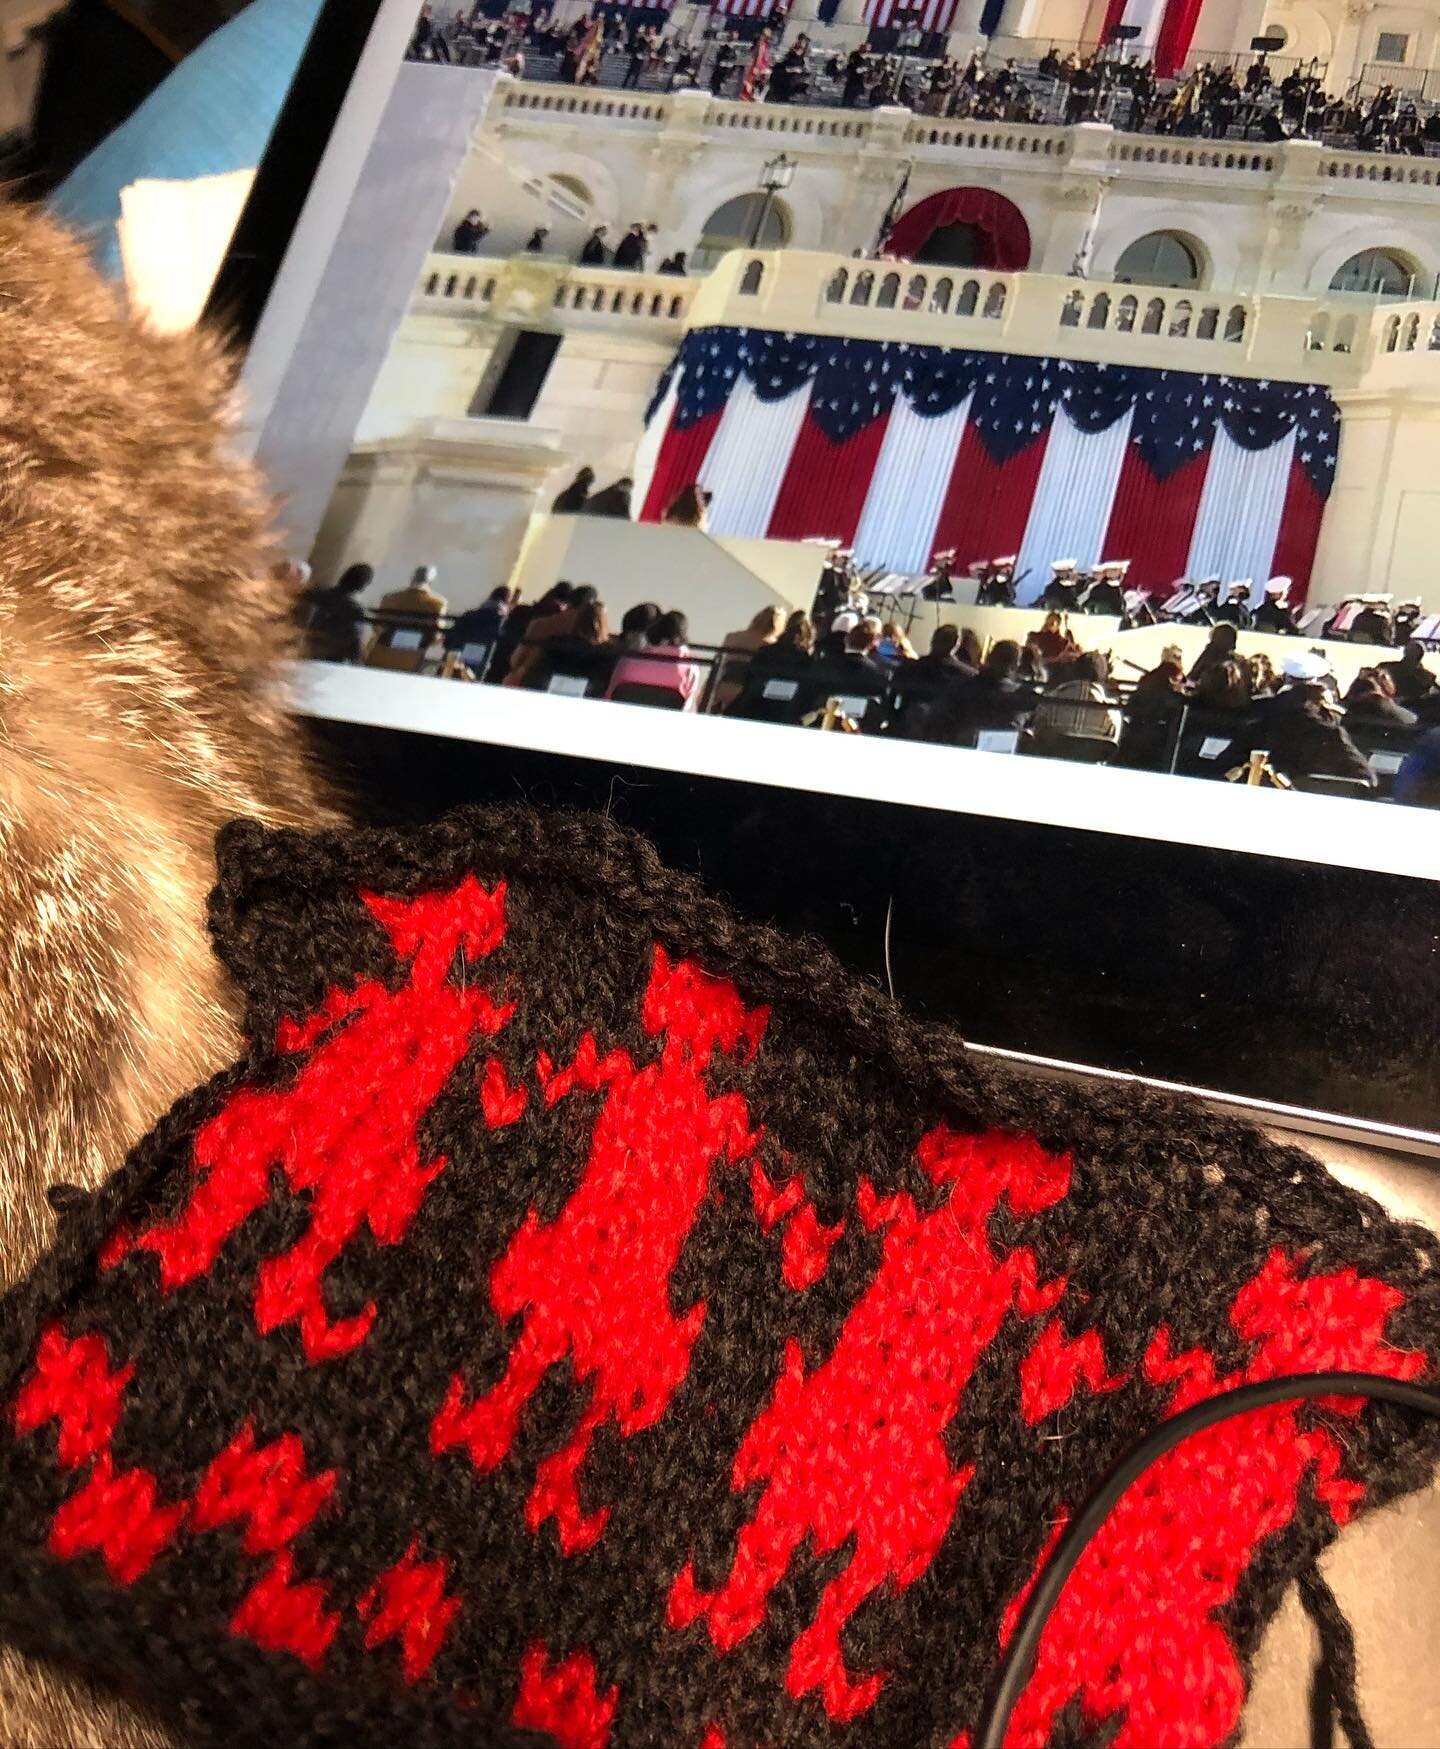 🧶New day new administration new sweater! Swatching ladies holding hands as @joebiden and @kamalaharris are sworn in. Casting on at the bottom edge, growing a knit as time goes on. The future remains, as always, unknitten. Cast on with me! Let&rsquo;